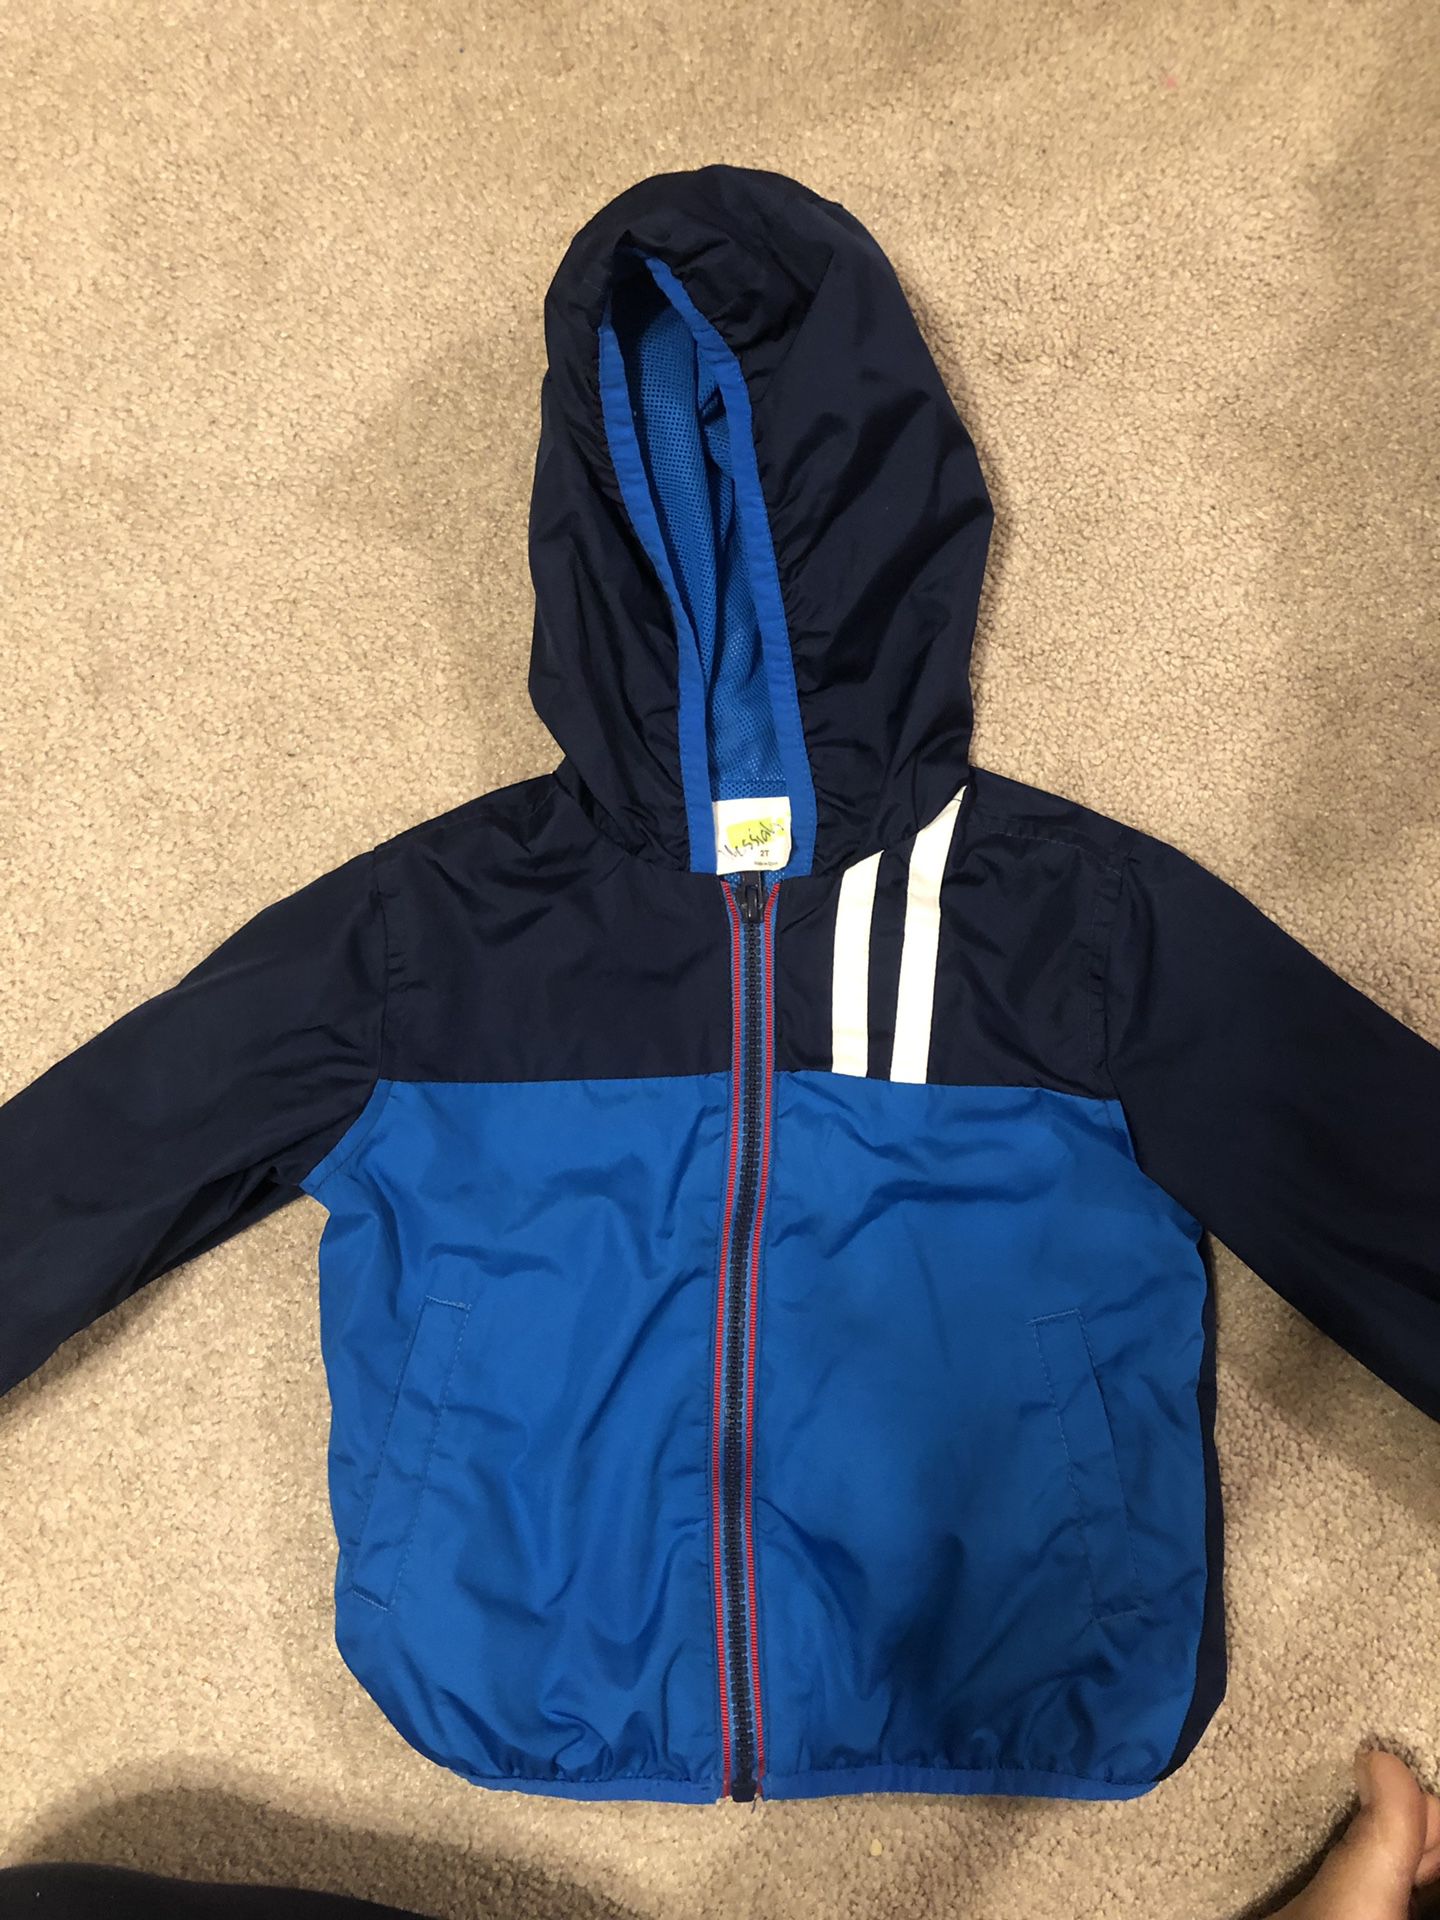 Toddlers 2T jacket